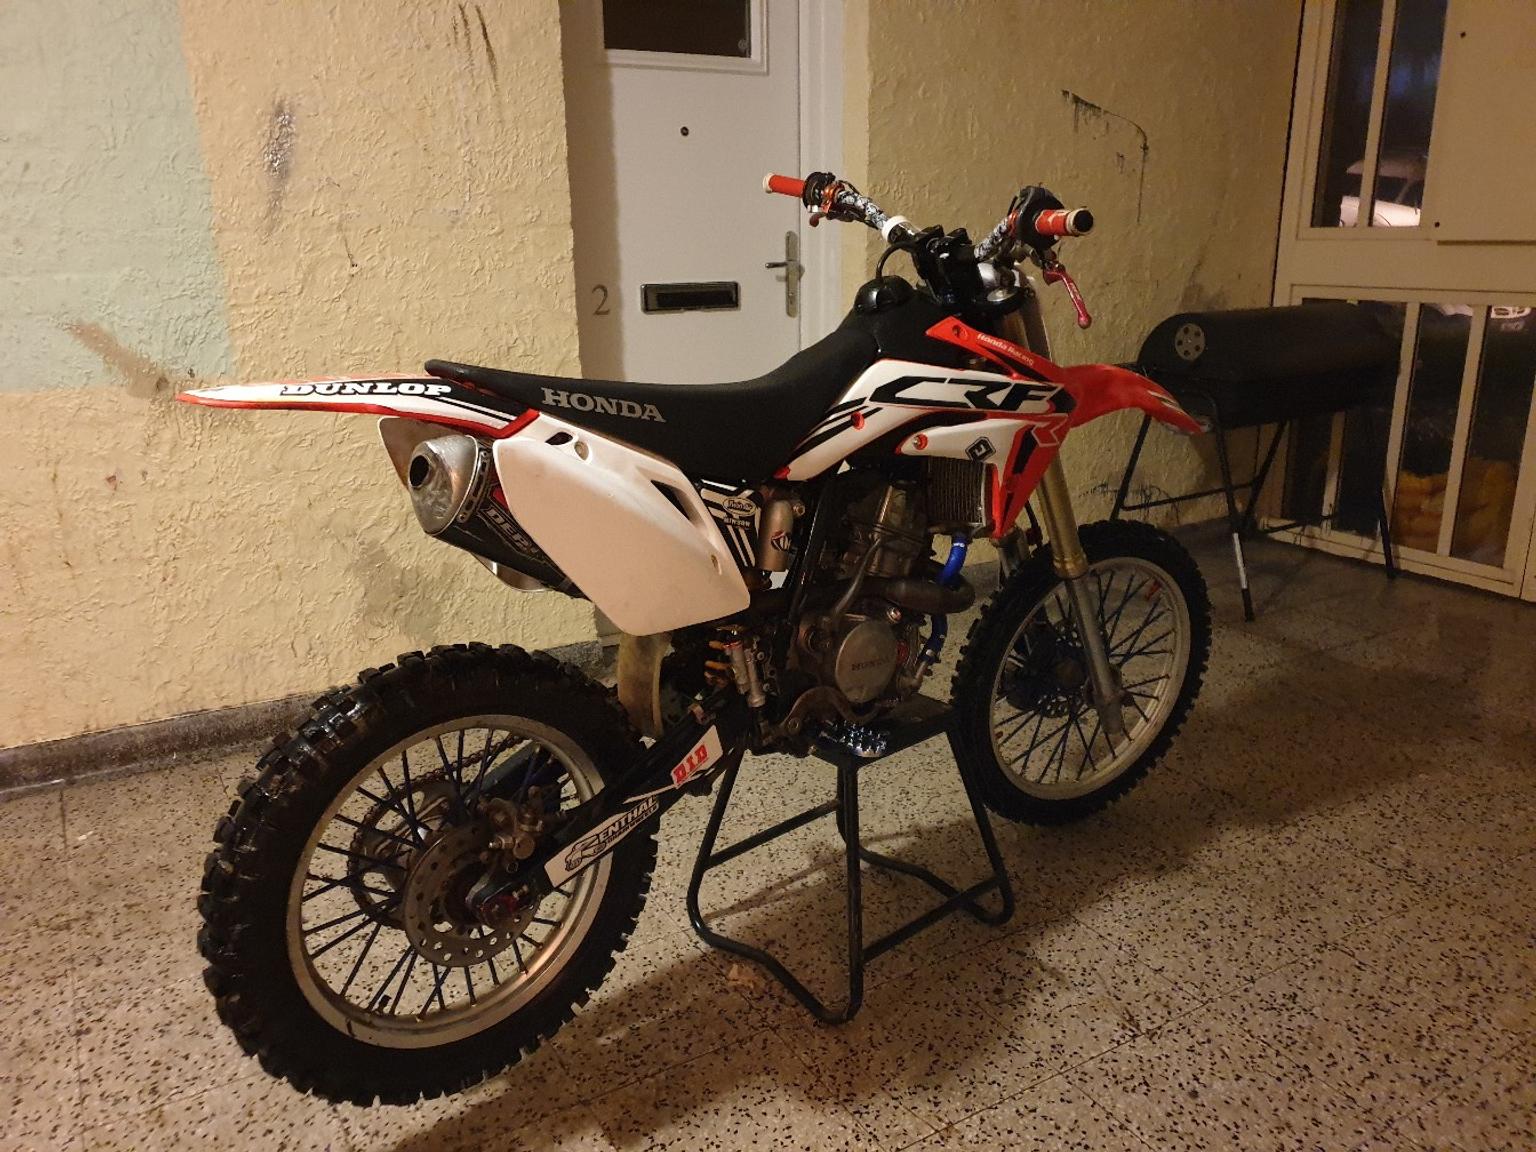 honda crf150r in LS16 Leeds for £1,350.00 for sale | Shpock